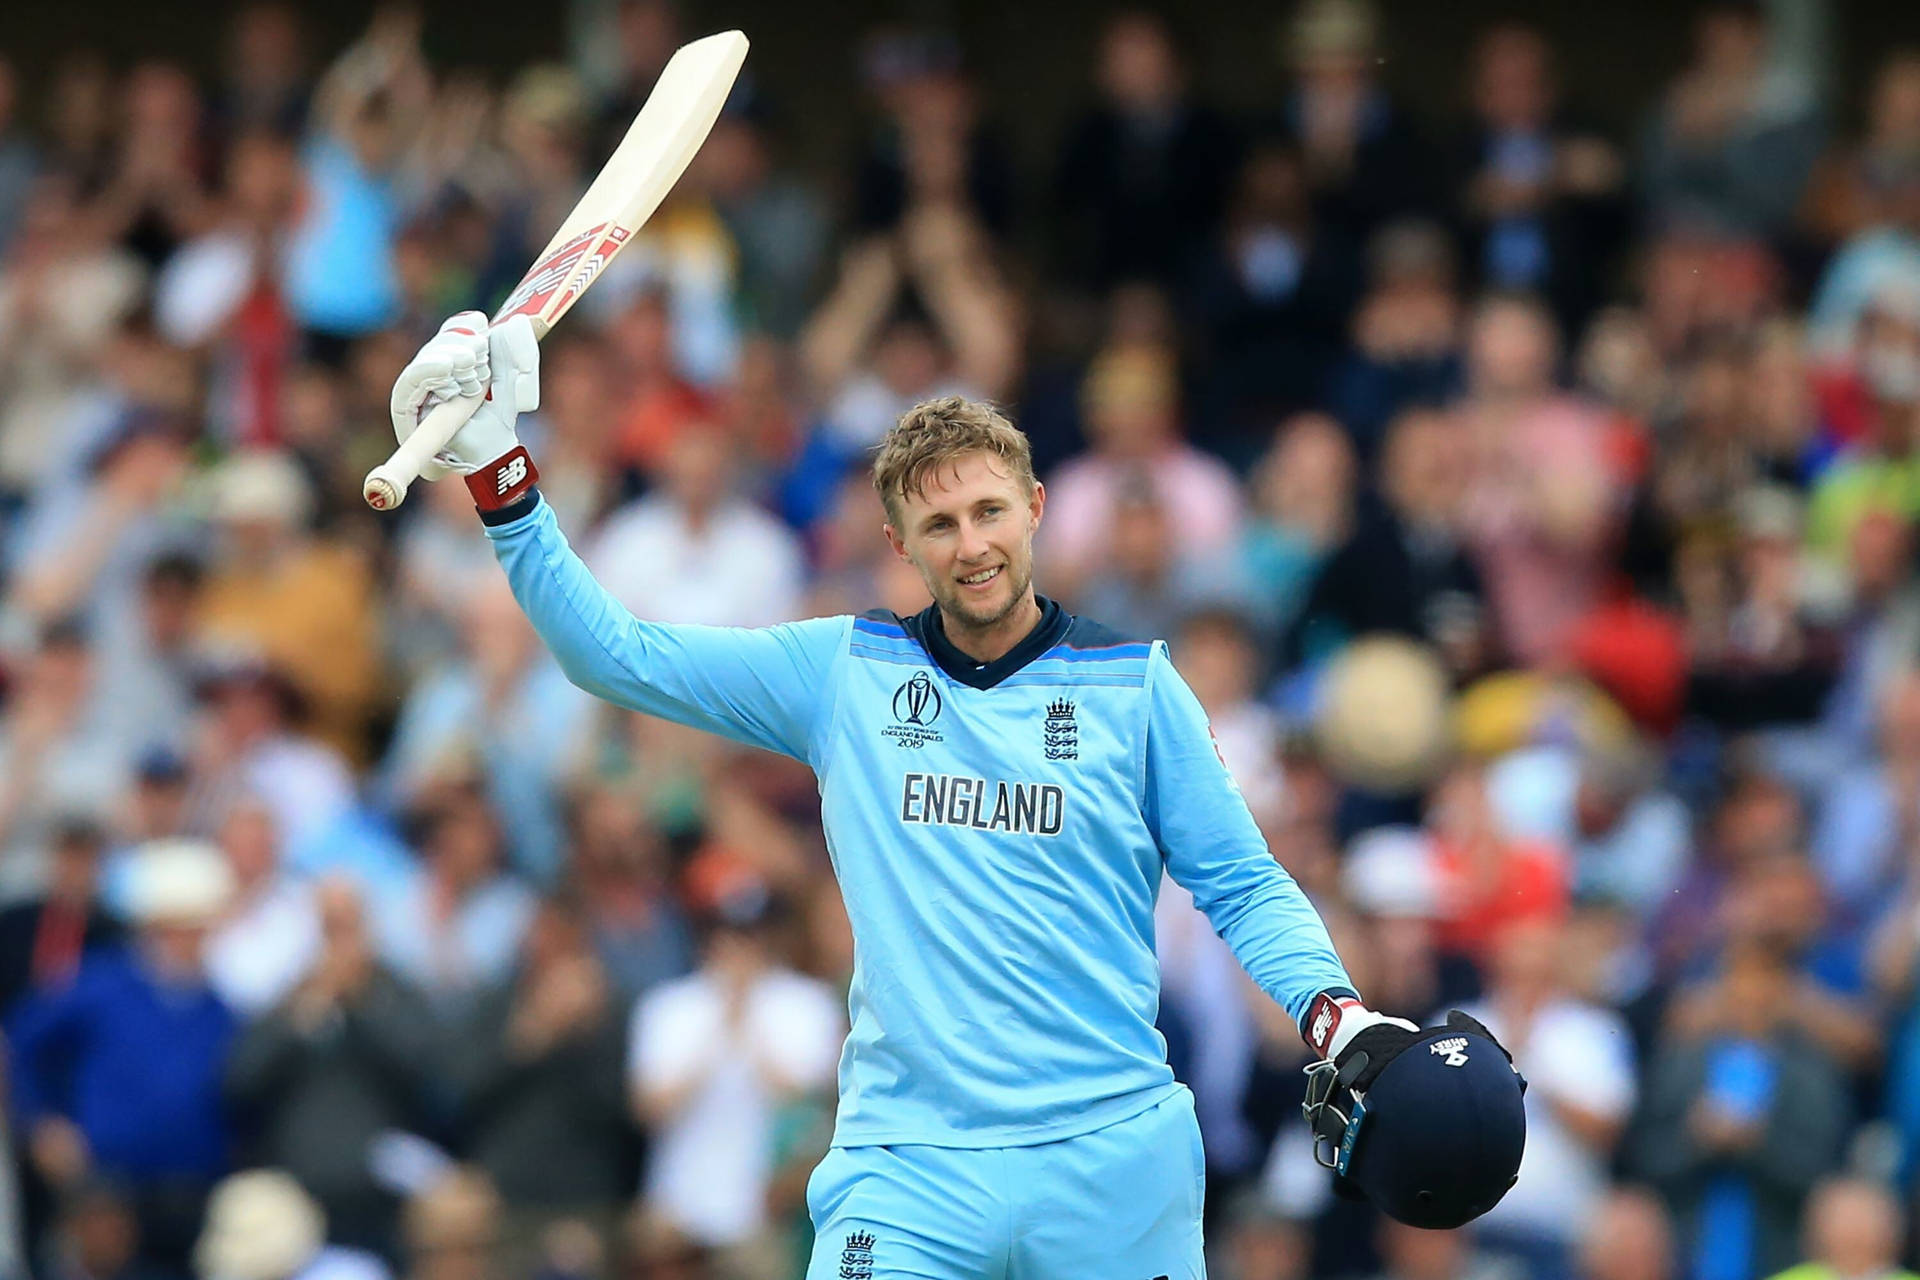 England Cricketer Joe Root In Action Background